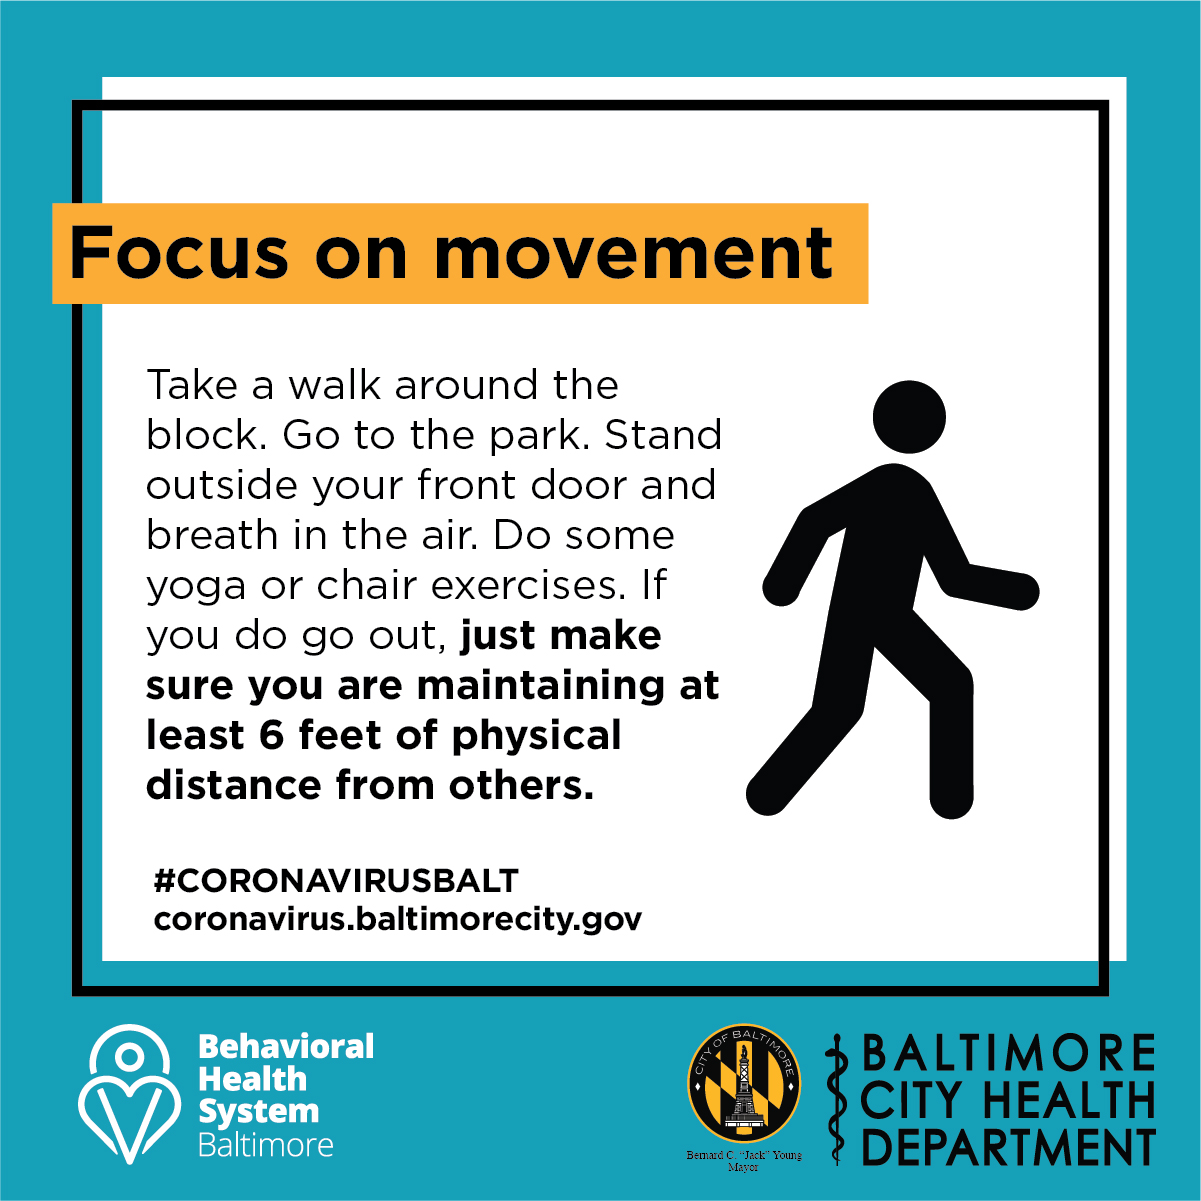 Take a walk, go to the park, and focus on movement and exercise.